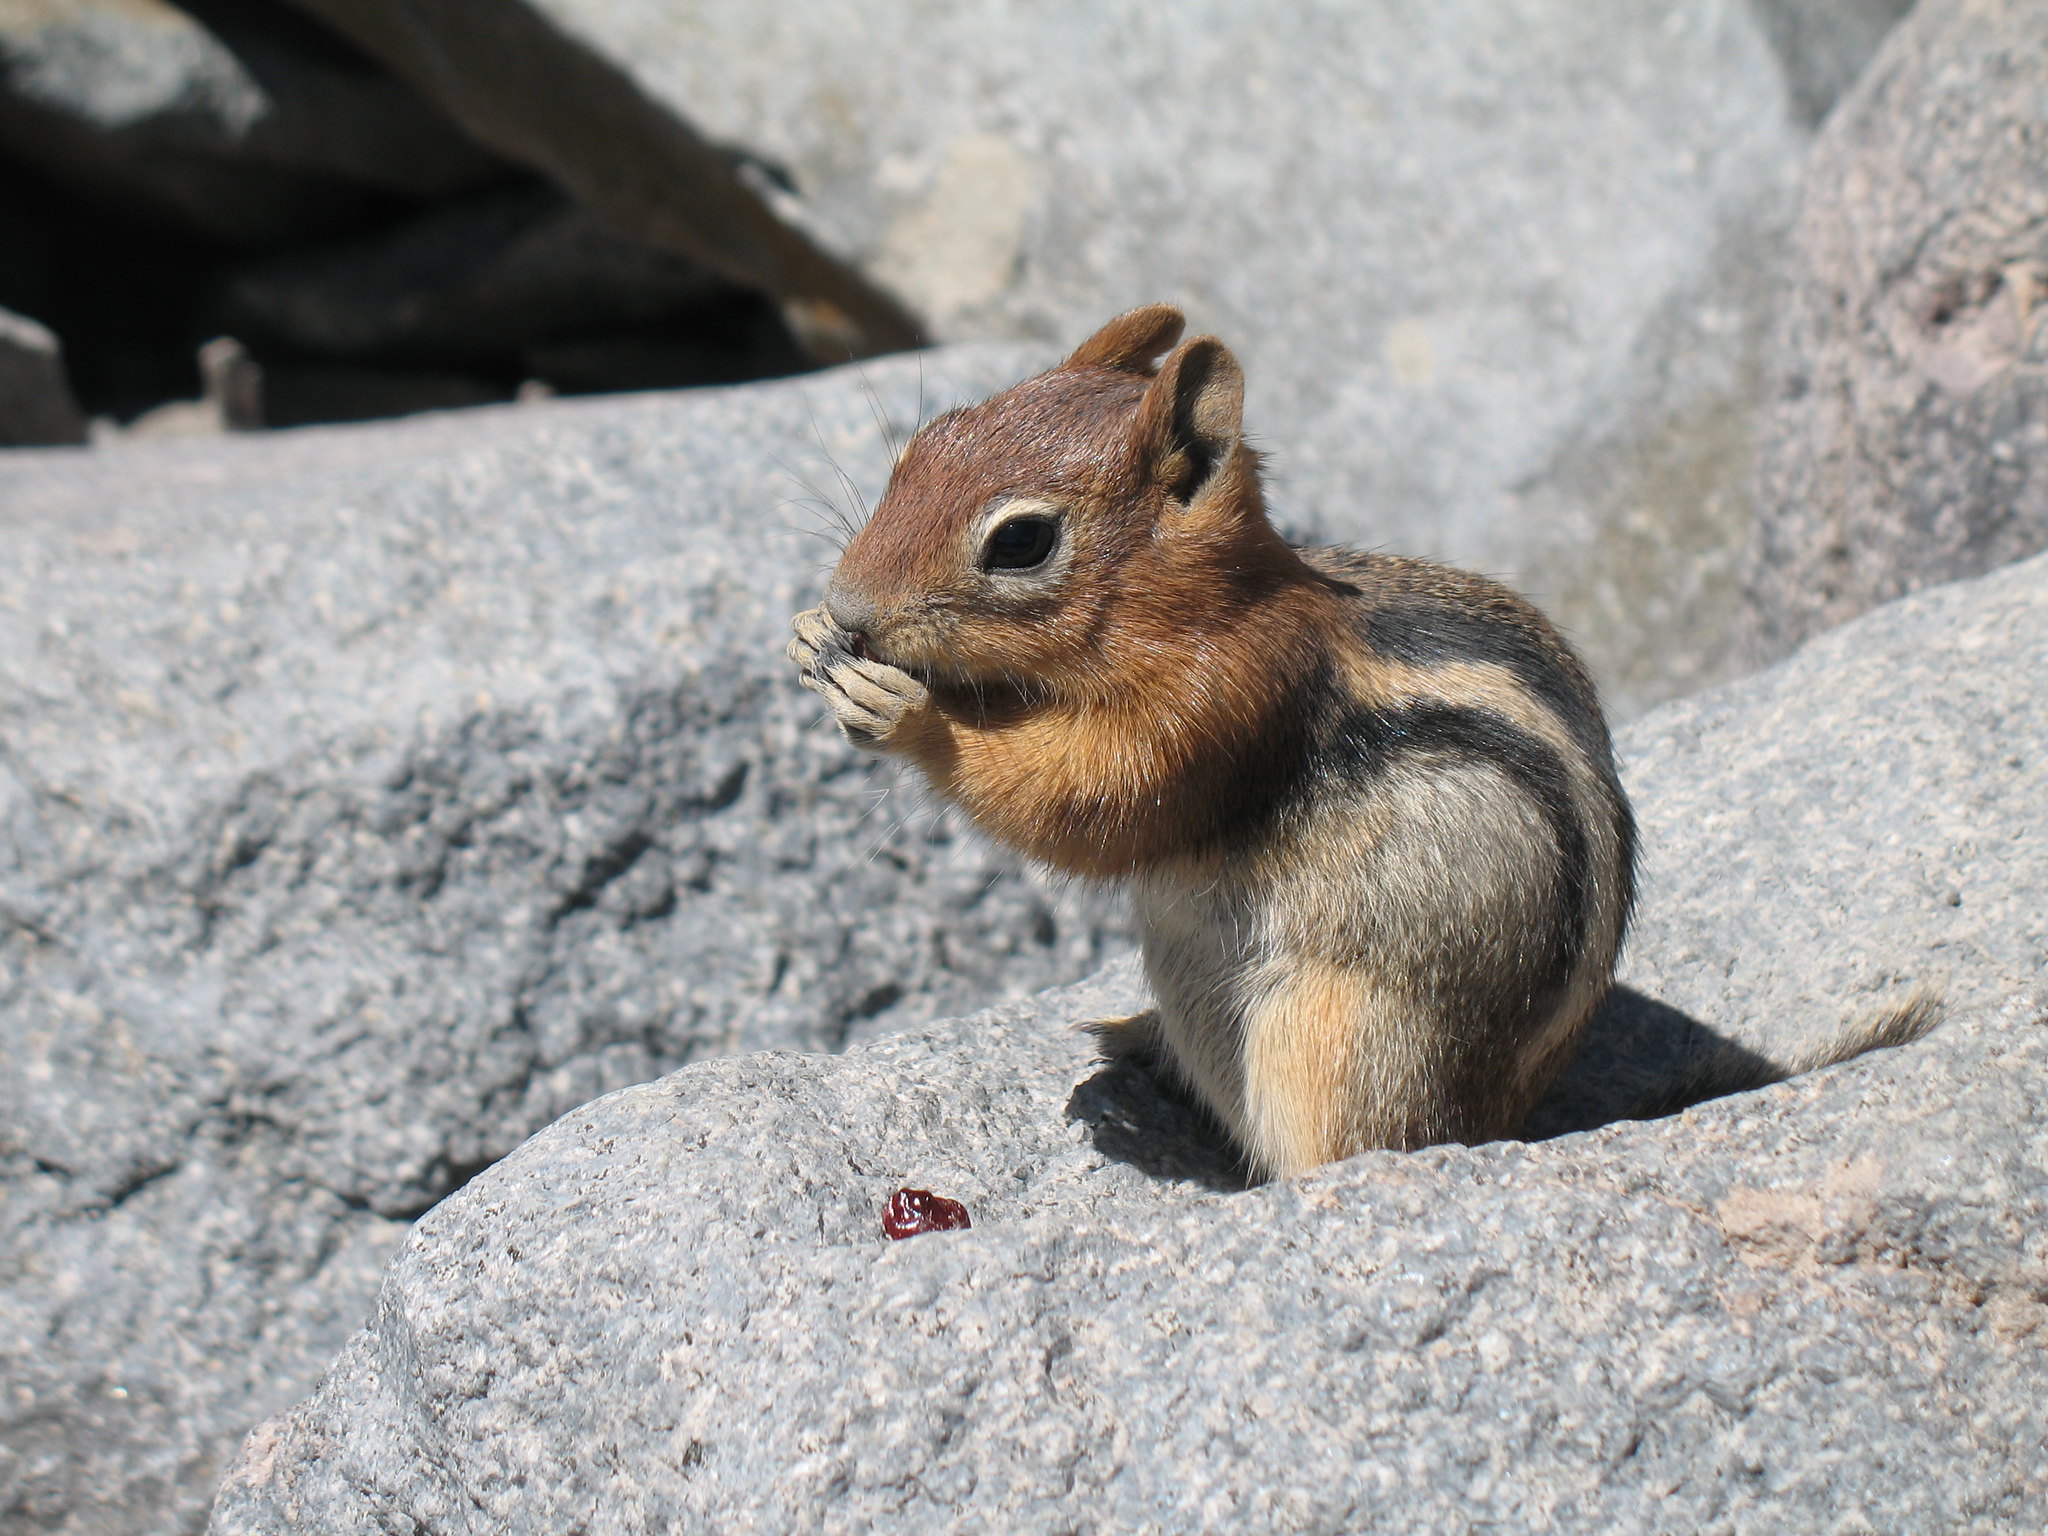 A chipmunk eats, while standing on rocks